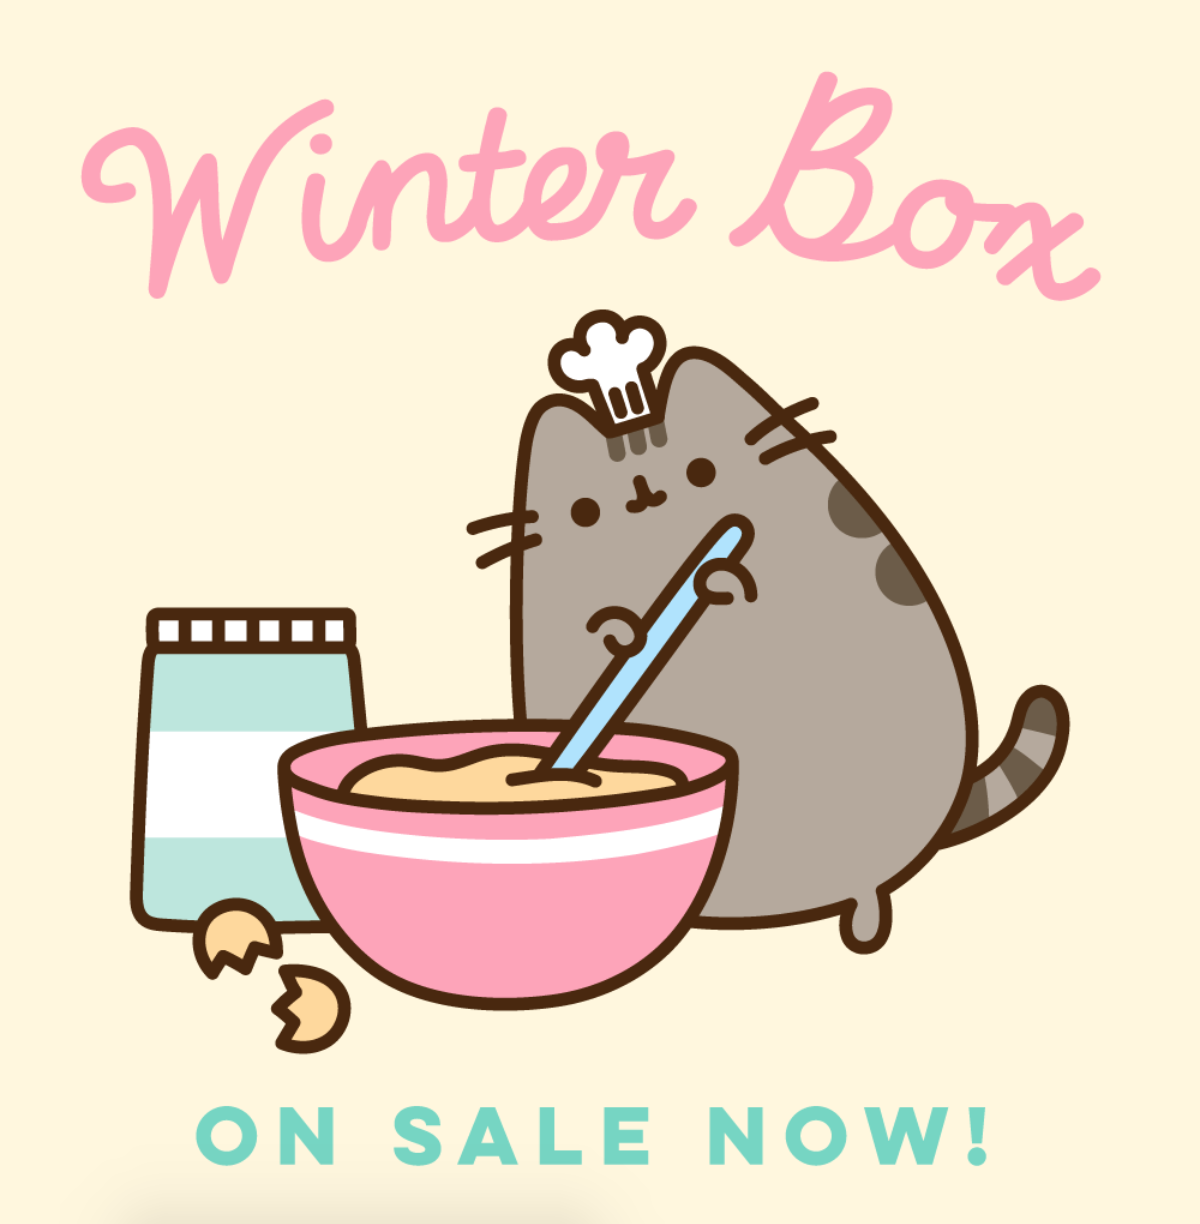 Pusheen Box Subscriptions Are Open! Winter 2019 Box Time!